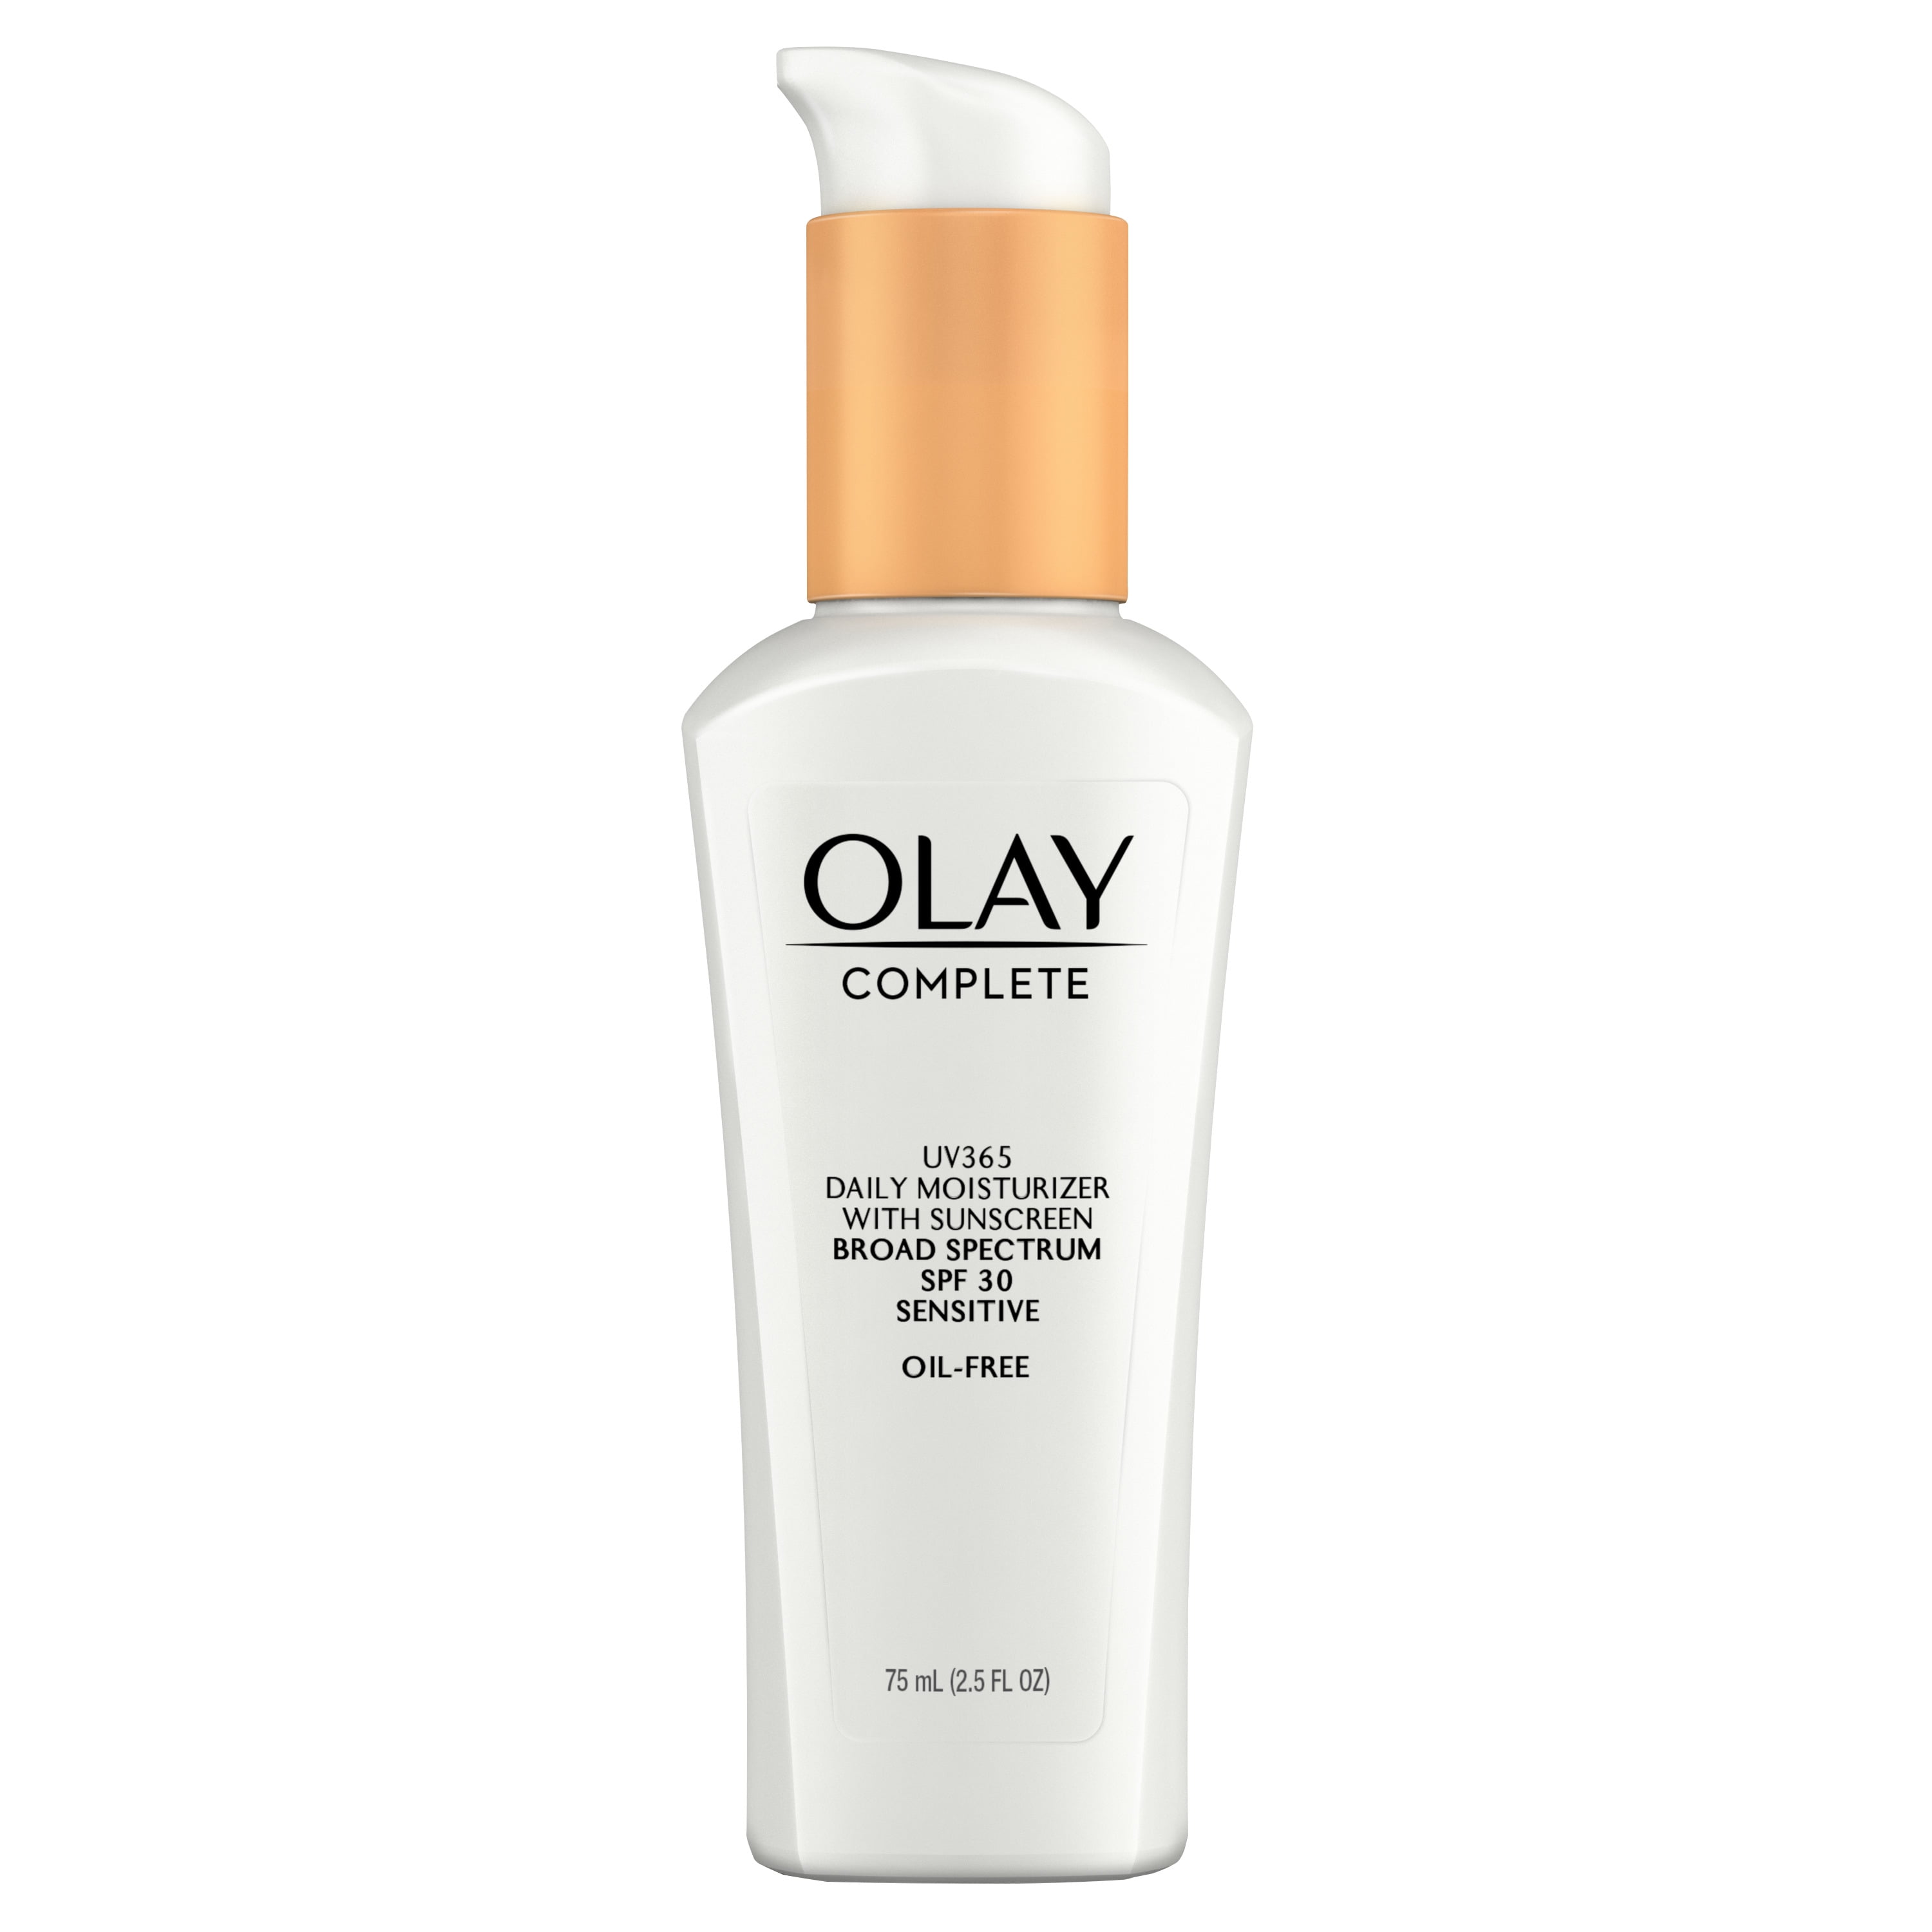 Olay Complete Lotion Moisturizer with SPF 30 Sensitive, 2.5 fl oz